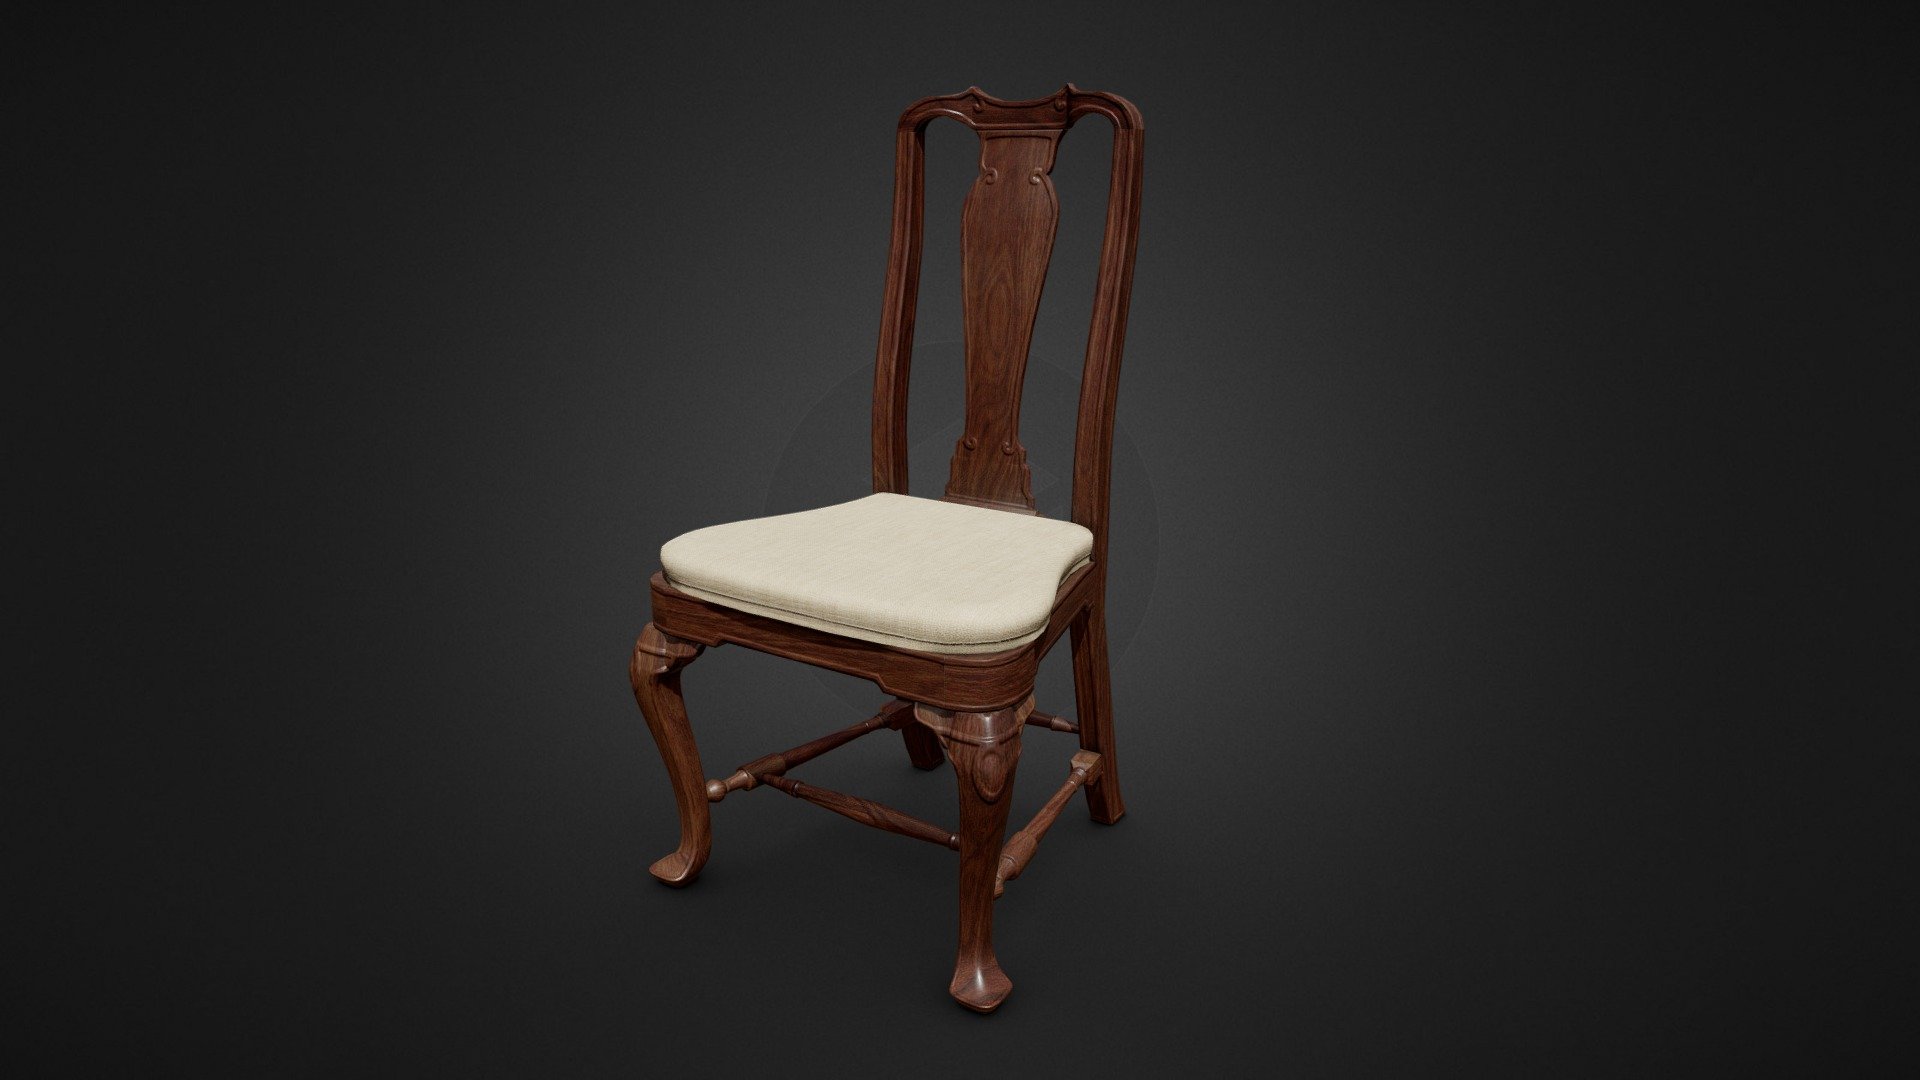 A chair roughly based on the real world Queen Anne Side Chair 3d model